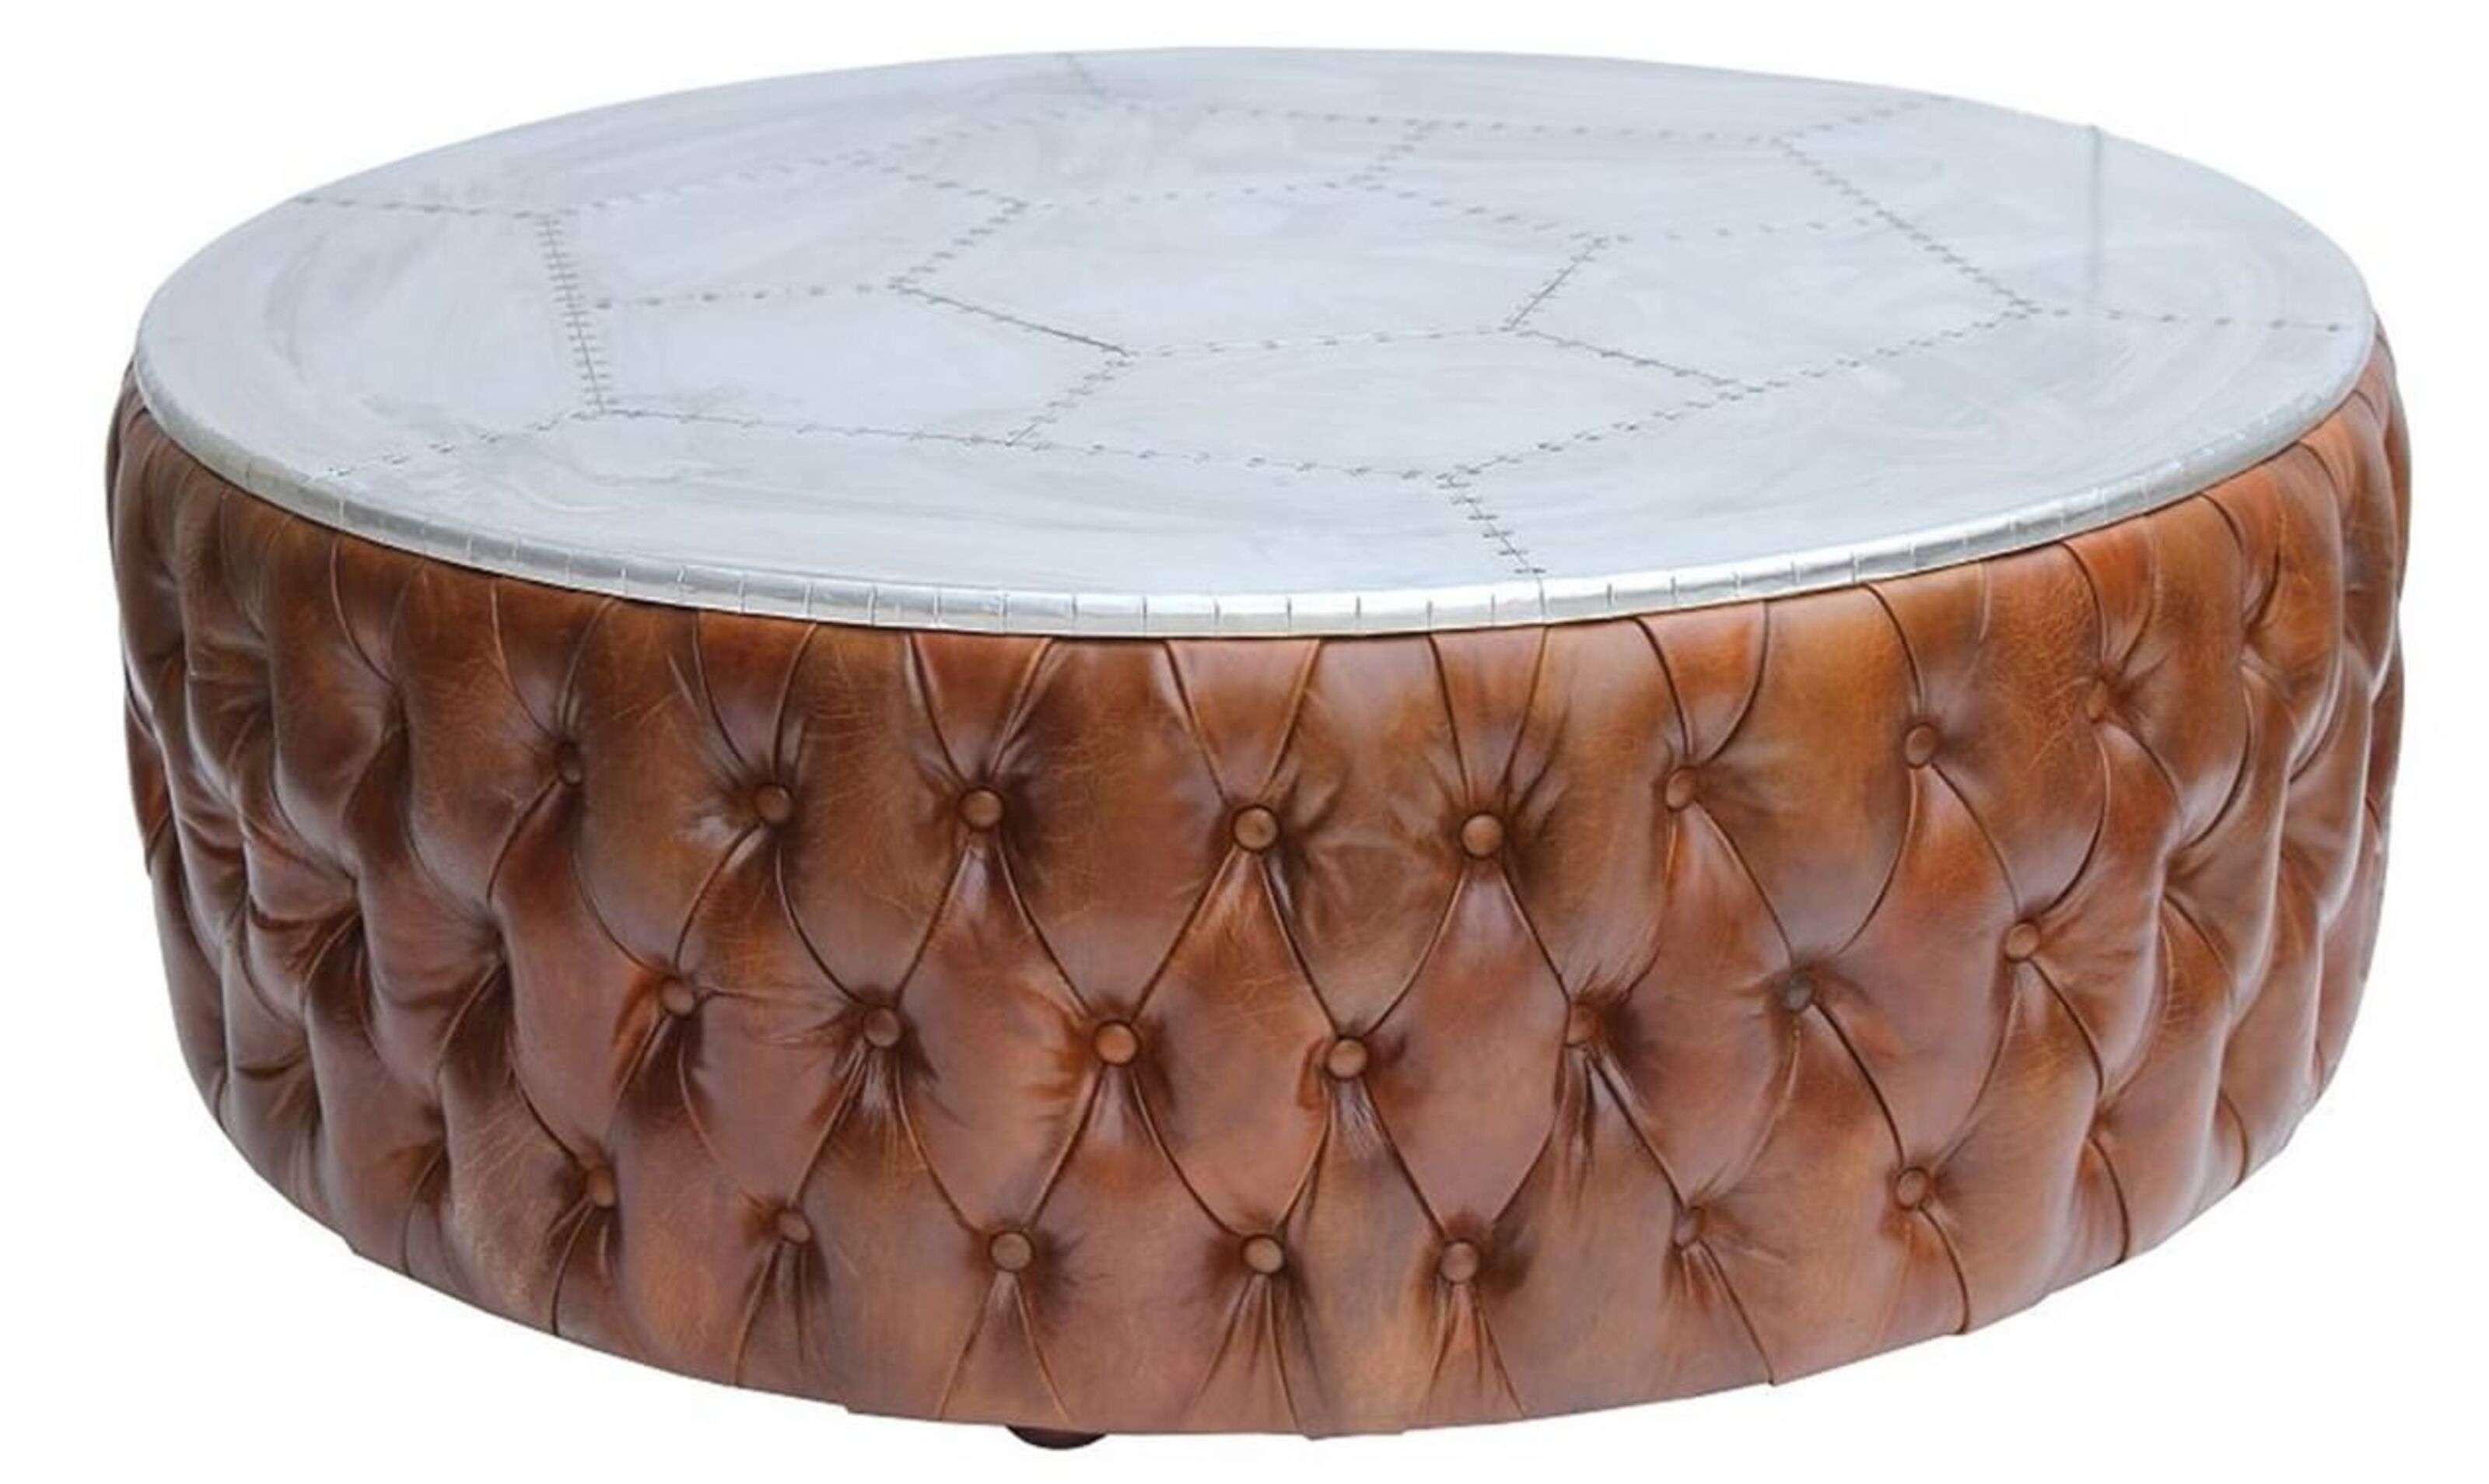 Chesterfield Round Aviator Leather, Leather Coffee Table Ottoman Round